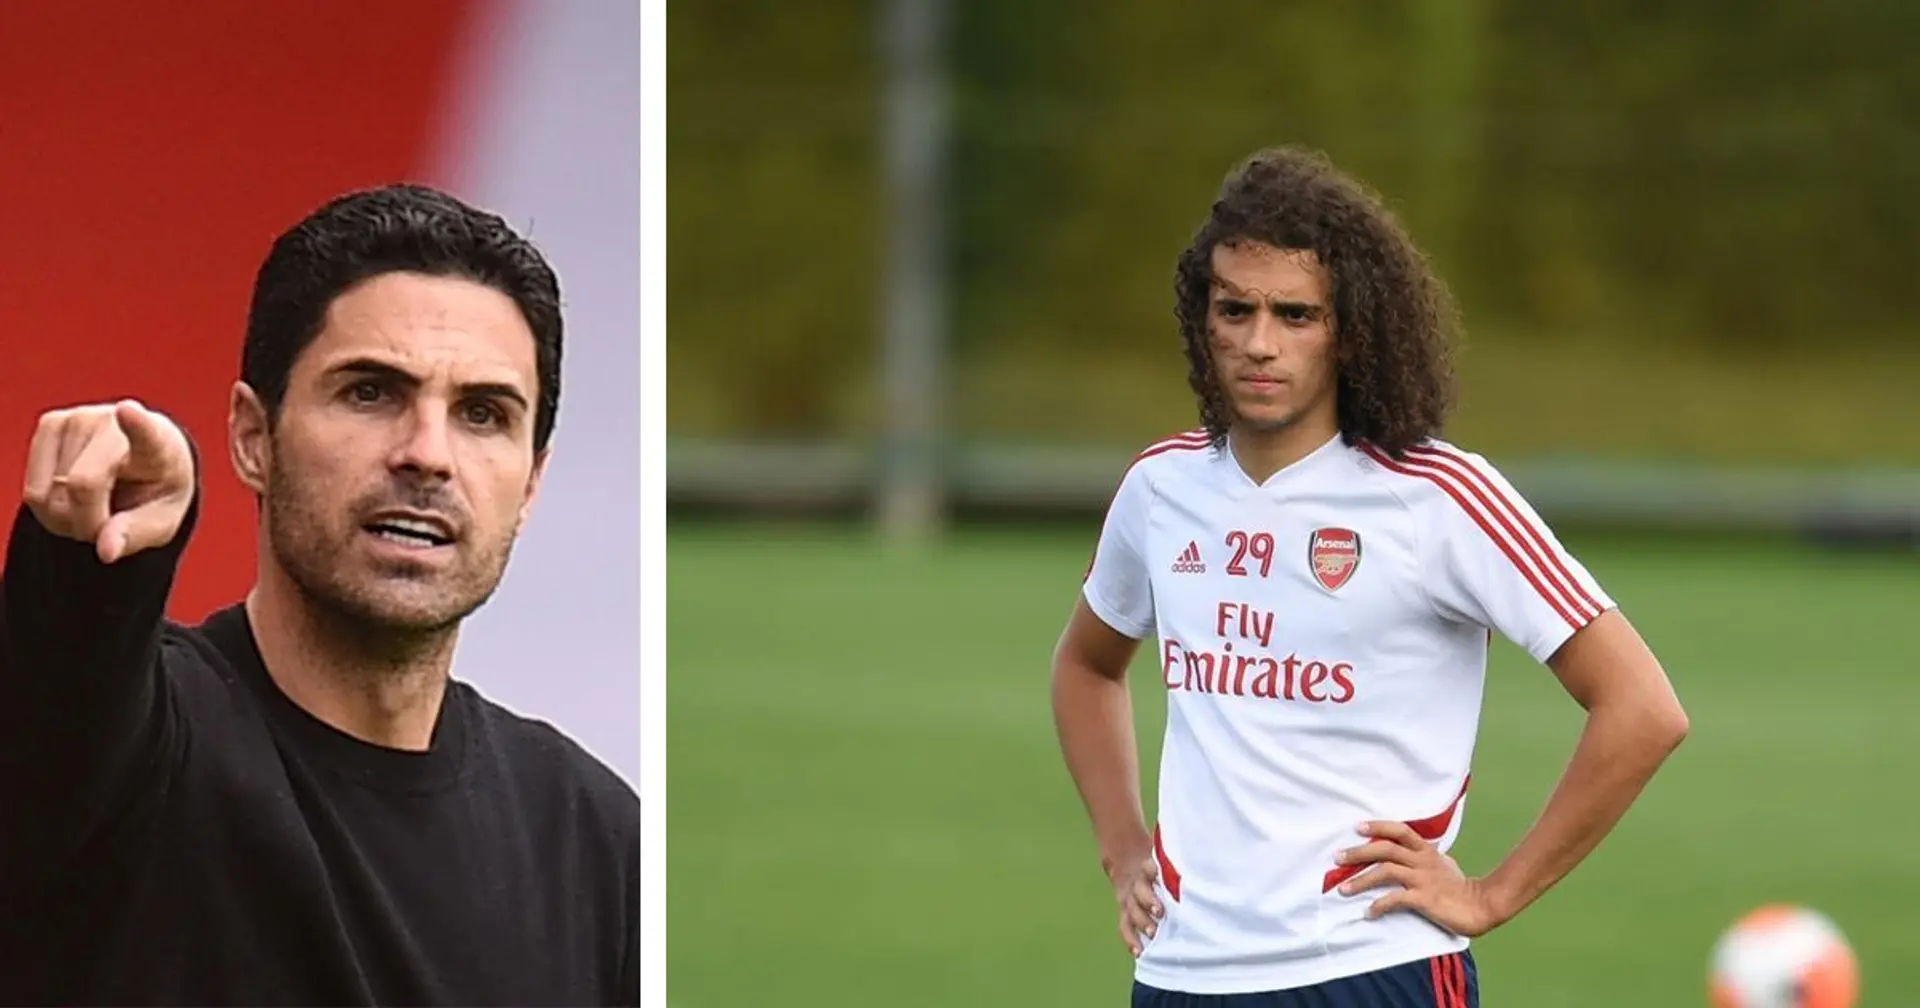 The Athletic: Guendouzi has not trained with Arsenal first-team since Brighton incident